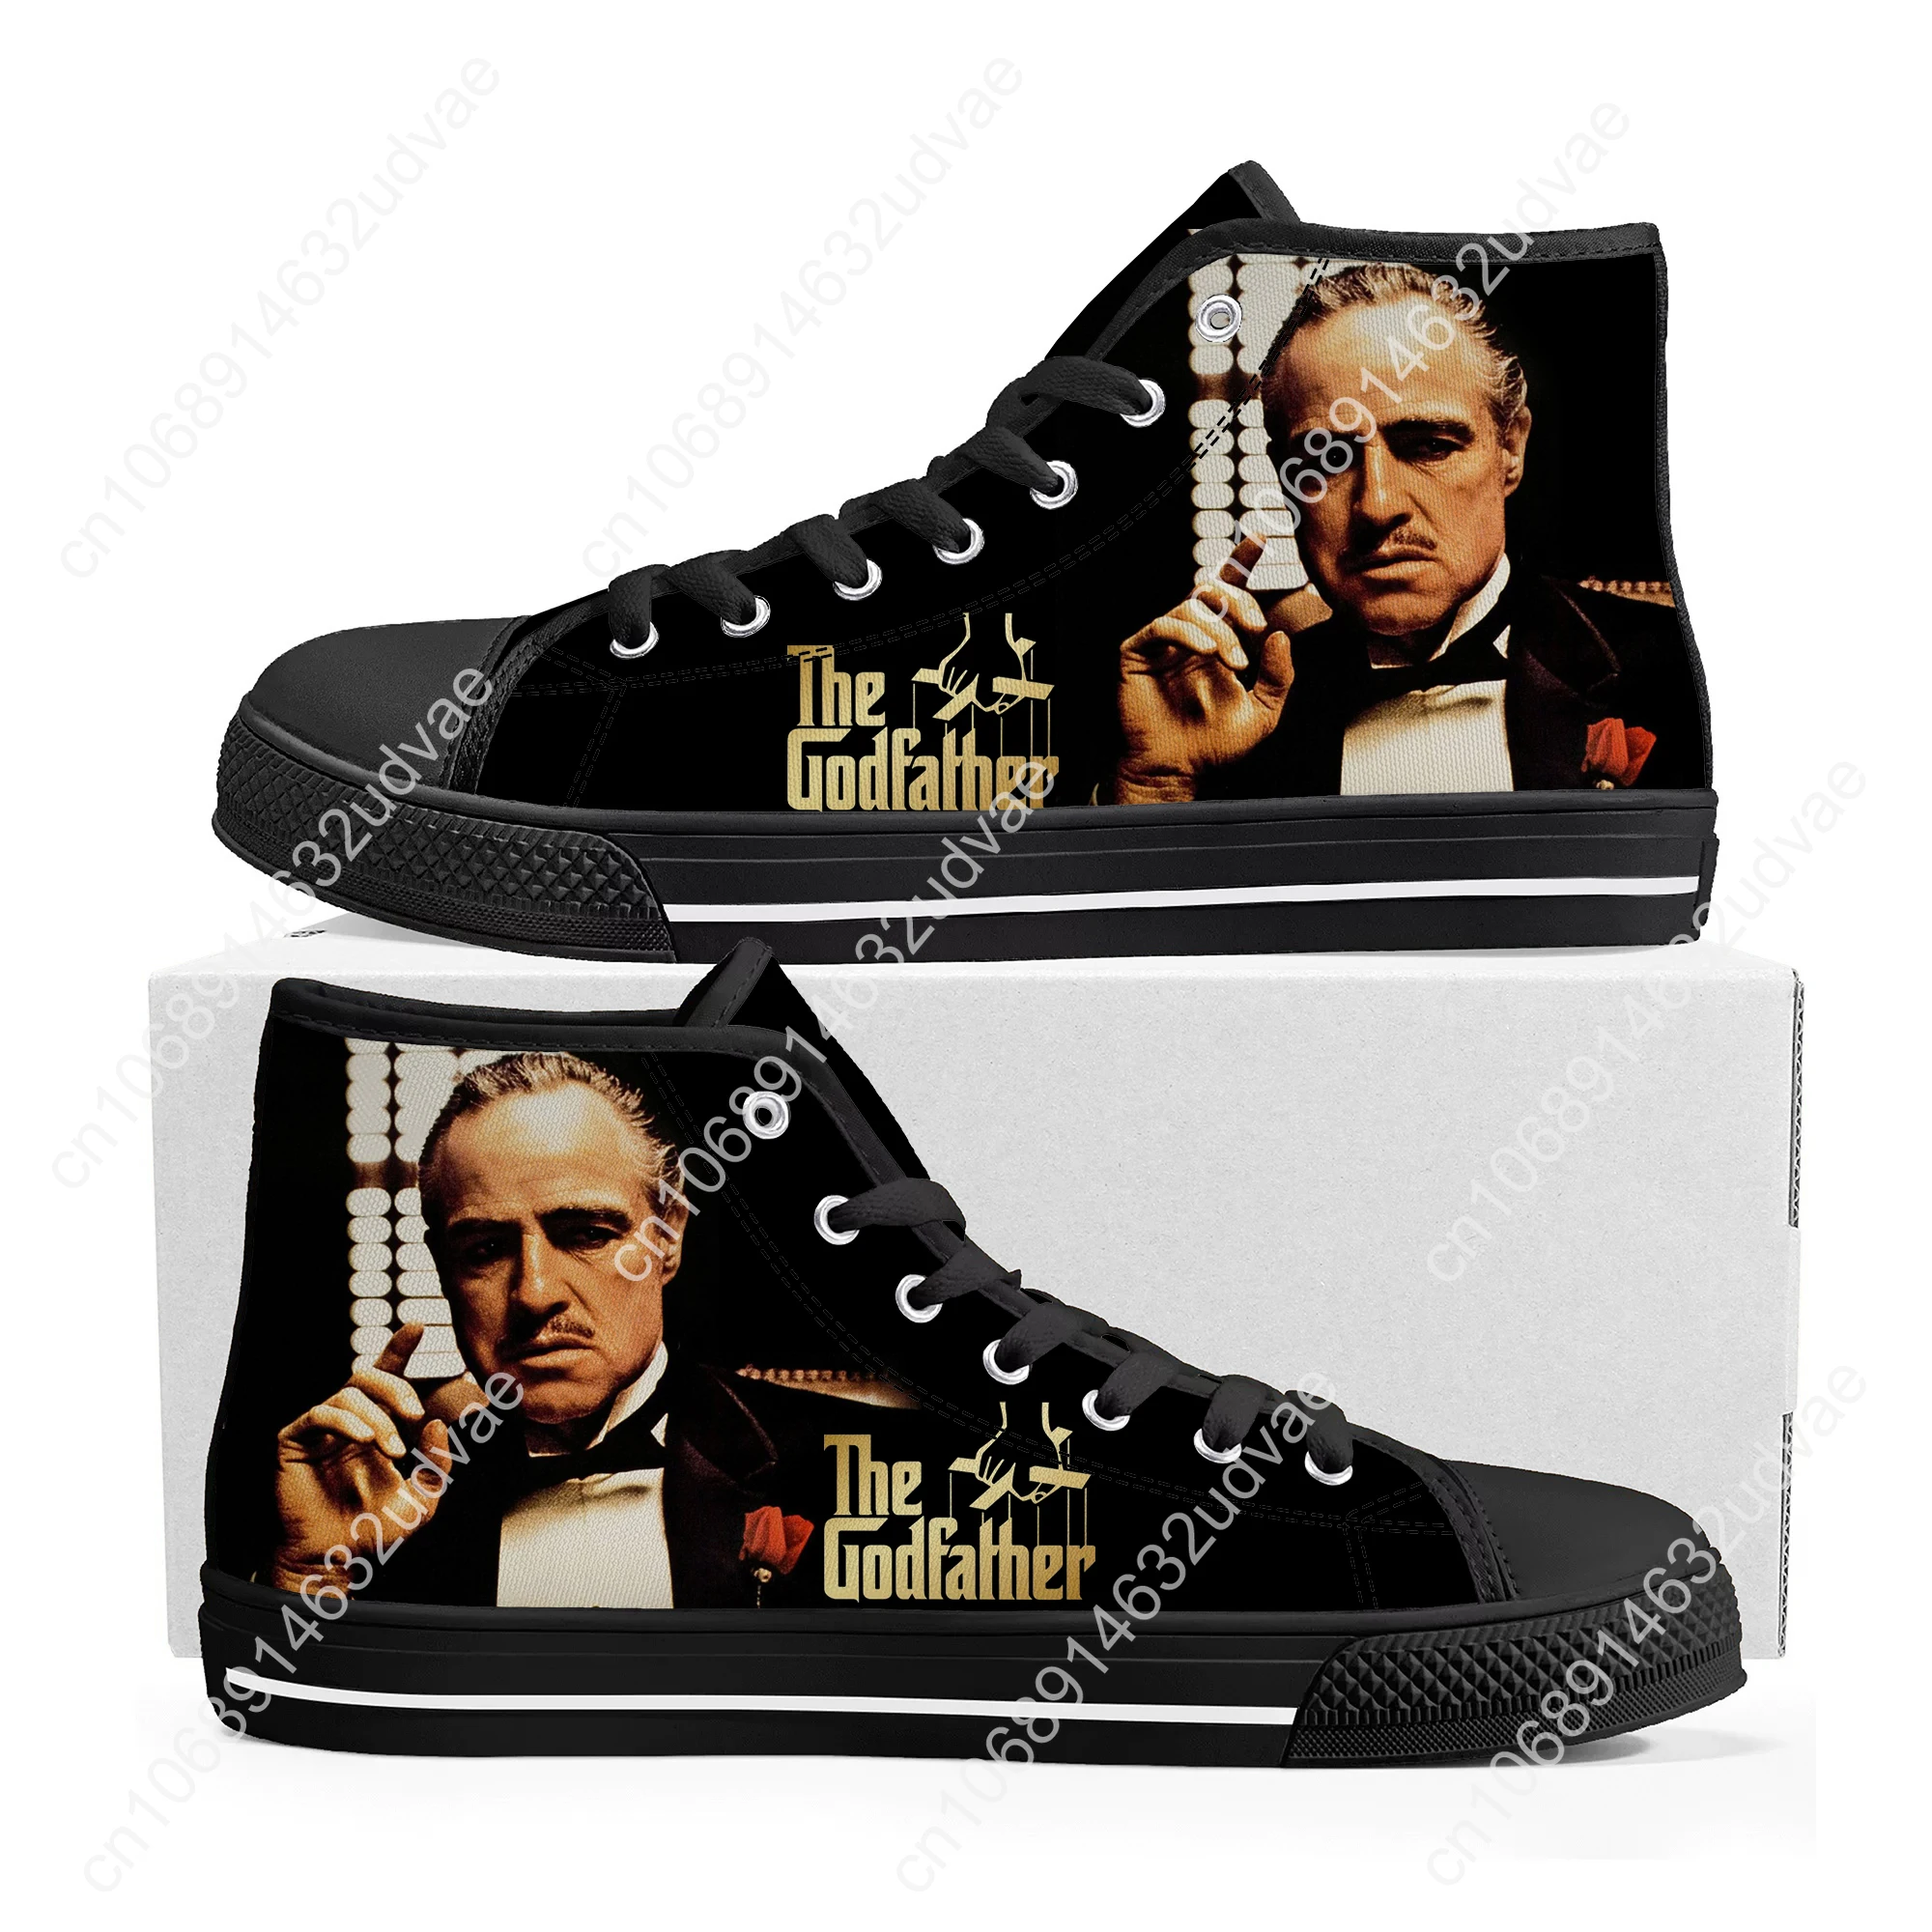 GodFather Shoes Metro South - 𝗟𝗶𝗴𝗵𝘁𝘄𝗲𝗶𝗴𝗵𝘁,  𝗖𝘂𝘀𝘁𝗼𝗺𝗶𝘇𝗮𝗯𝗹𝗲 𝗮𝗻𝗱 𝗦𝘁𝘆𝗹𝗶𝘀𝗵 🤩 Have a customized pair  made for you 👌✨ 📨Shoot us a message and we will assist you with your  order For His